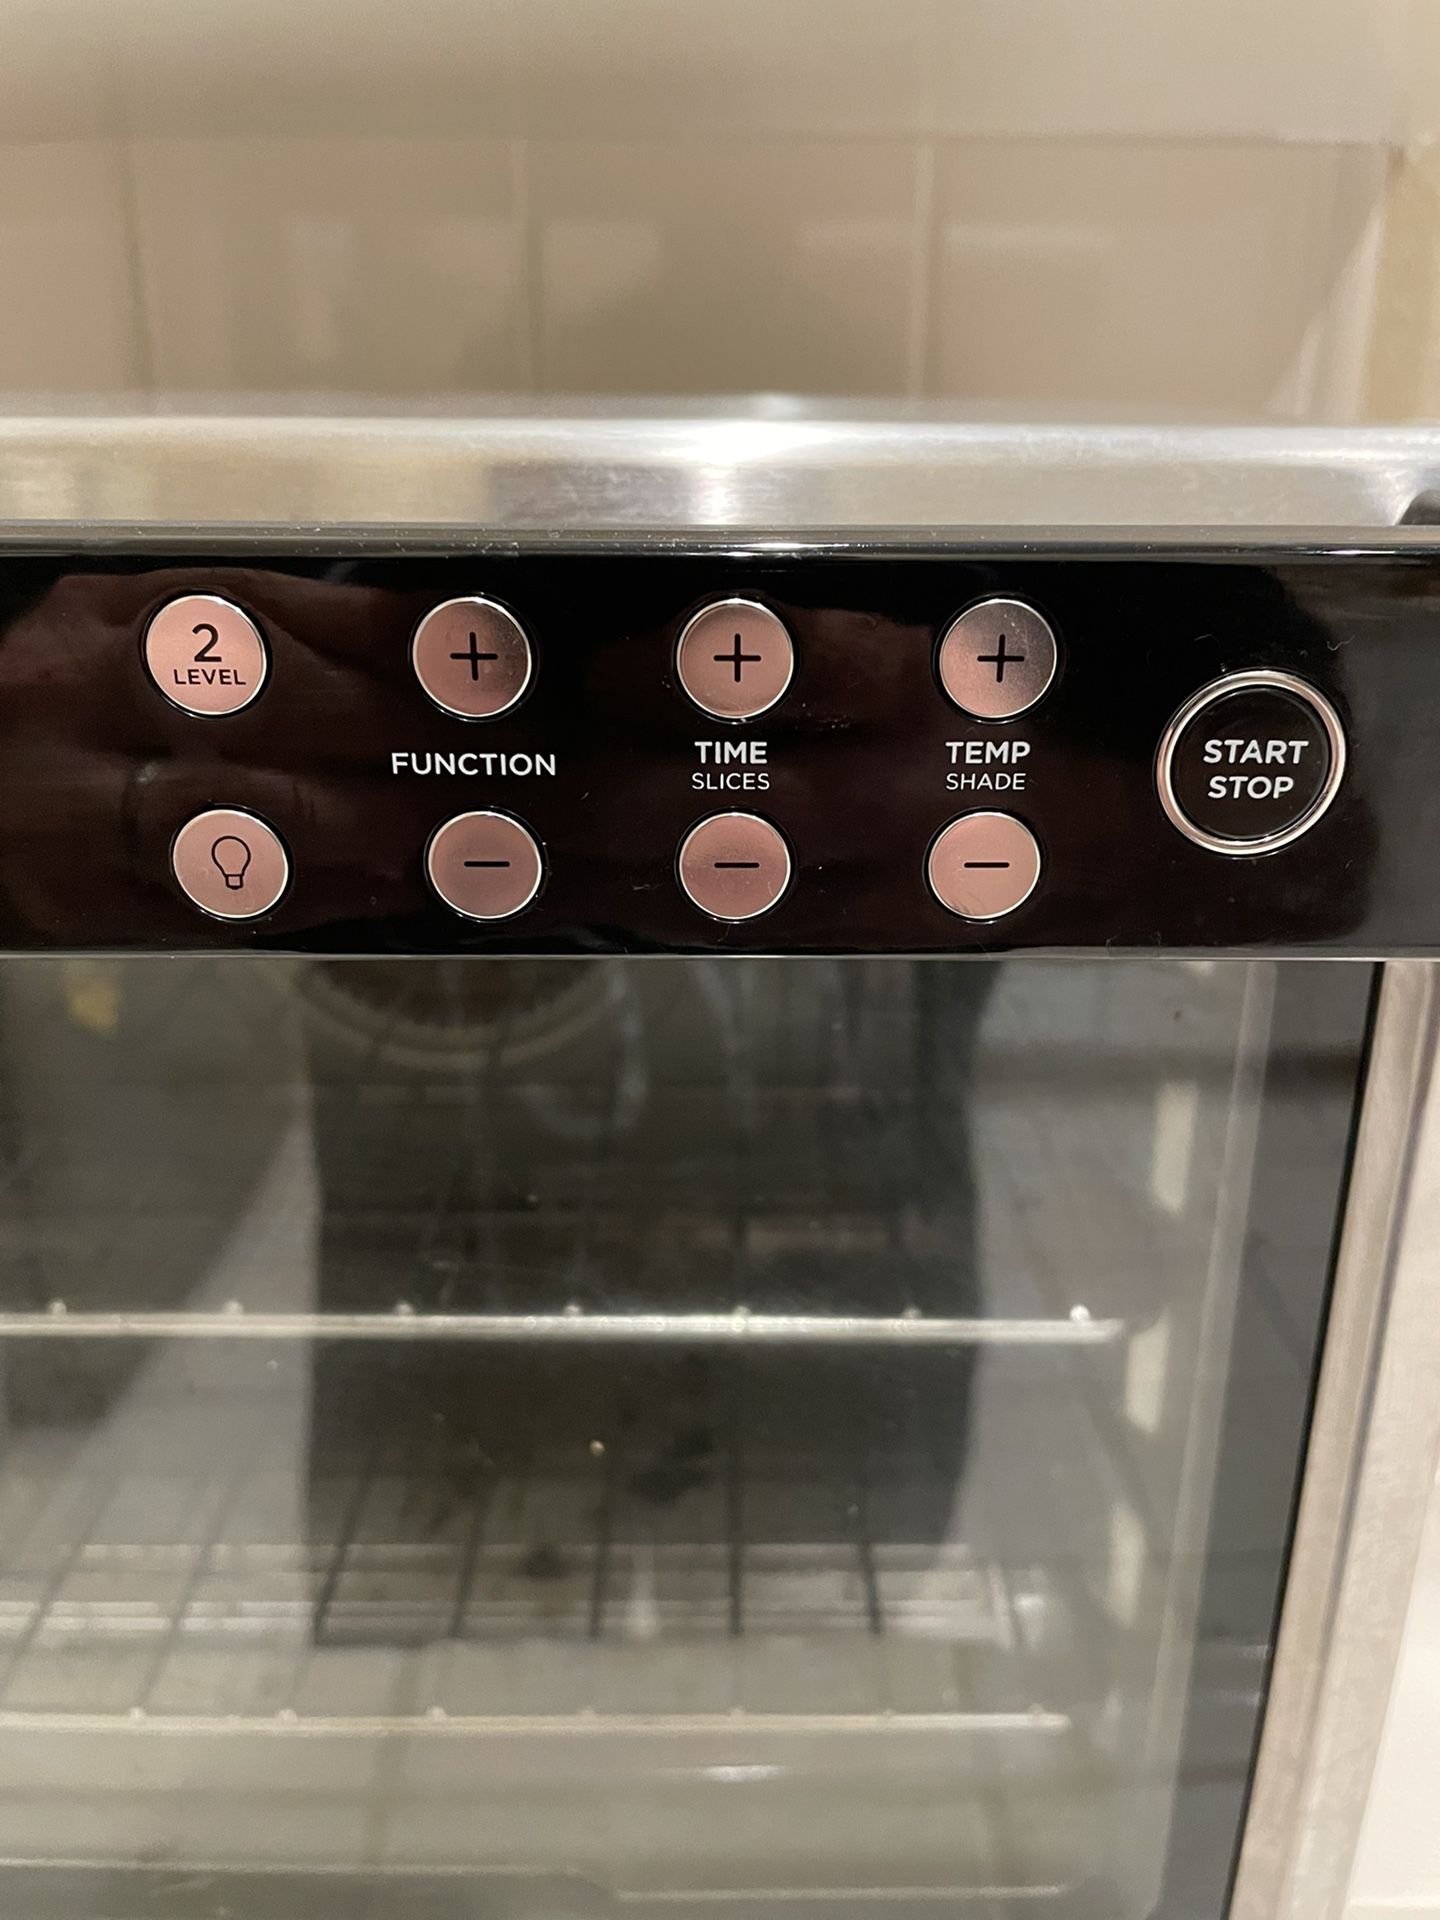 Ninja Foodi XL Pro Air Fry Oven 8-in-1 Large Countertop Convection Oven  DT200 for Sale in Montebello, CA - OfferUp